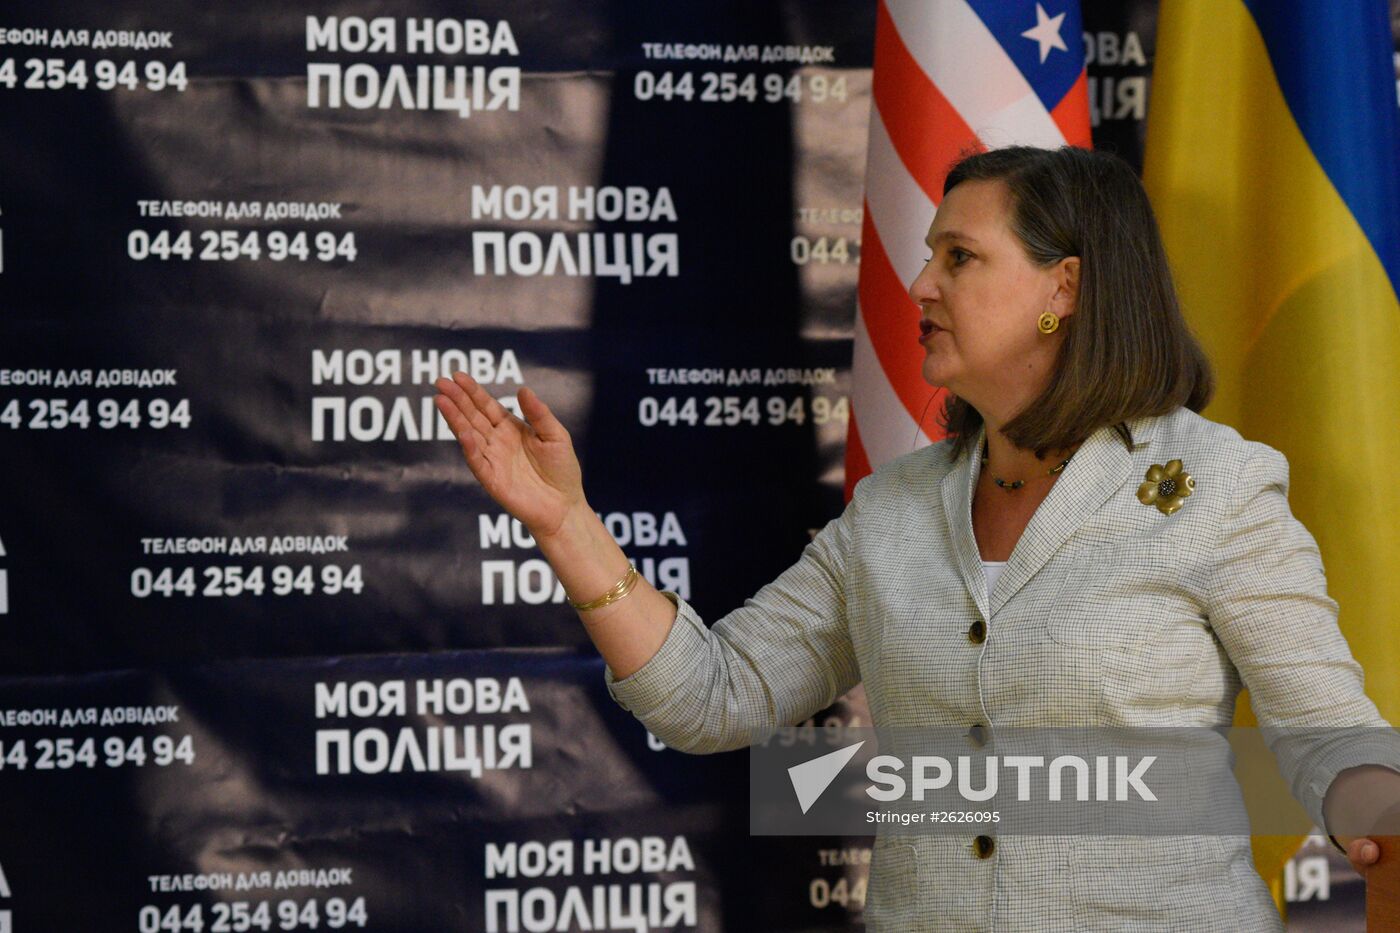 Assistant Secretary of State Victoria Nuland in Kiev